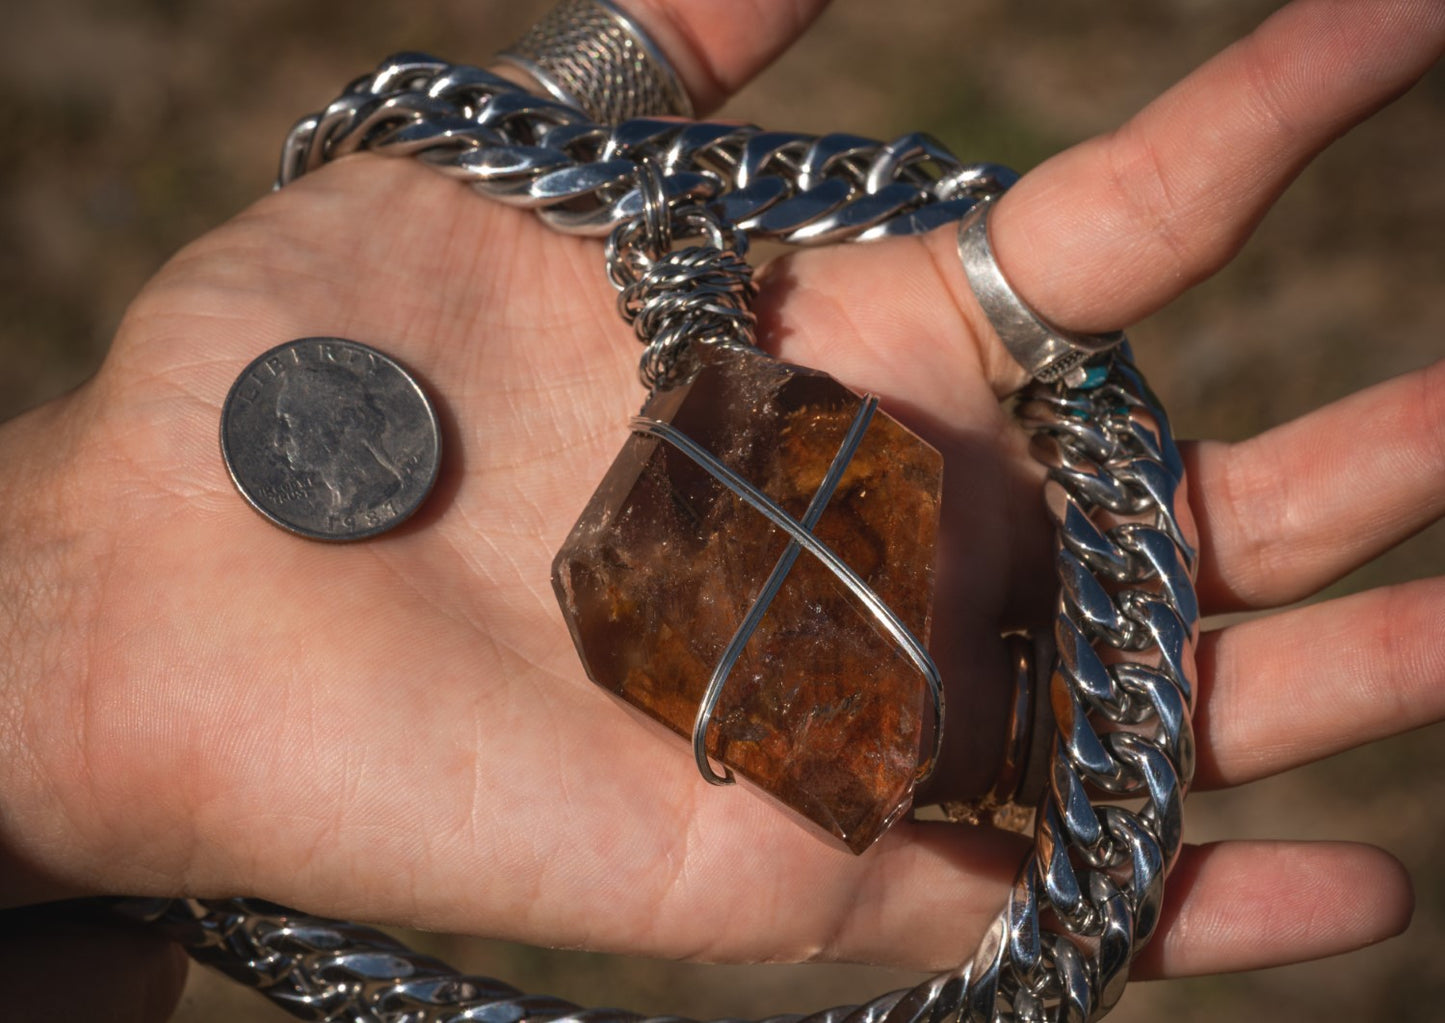 'Amplify the Good' Giant Rust Orange Lodolite Shield Stainless Steel Mega Chonk Necklace